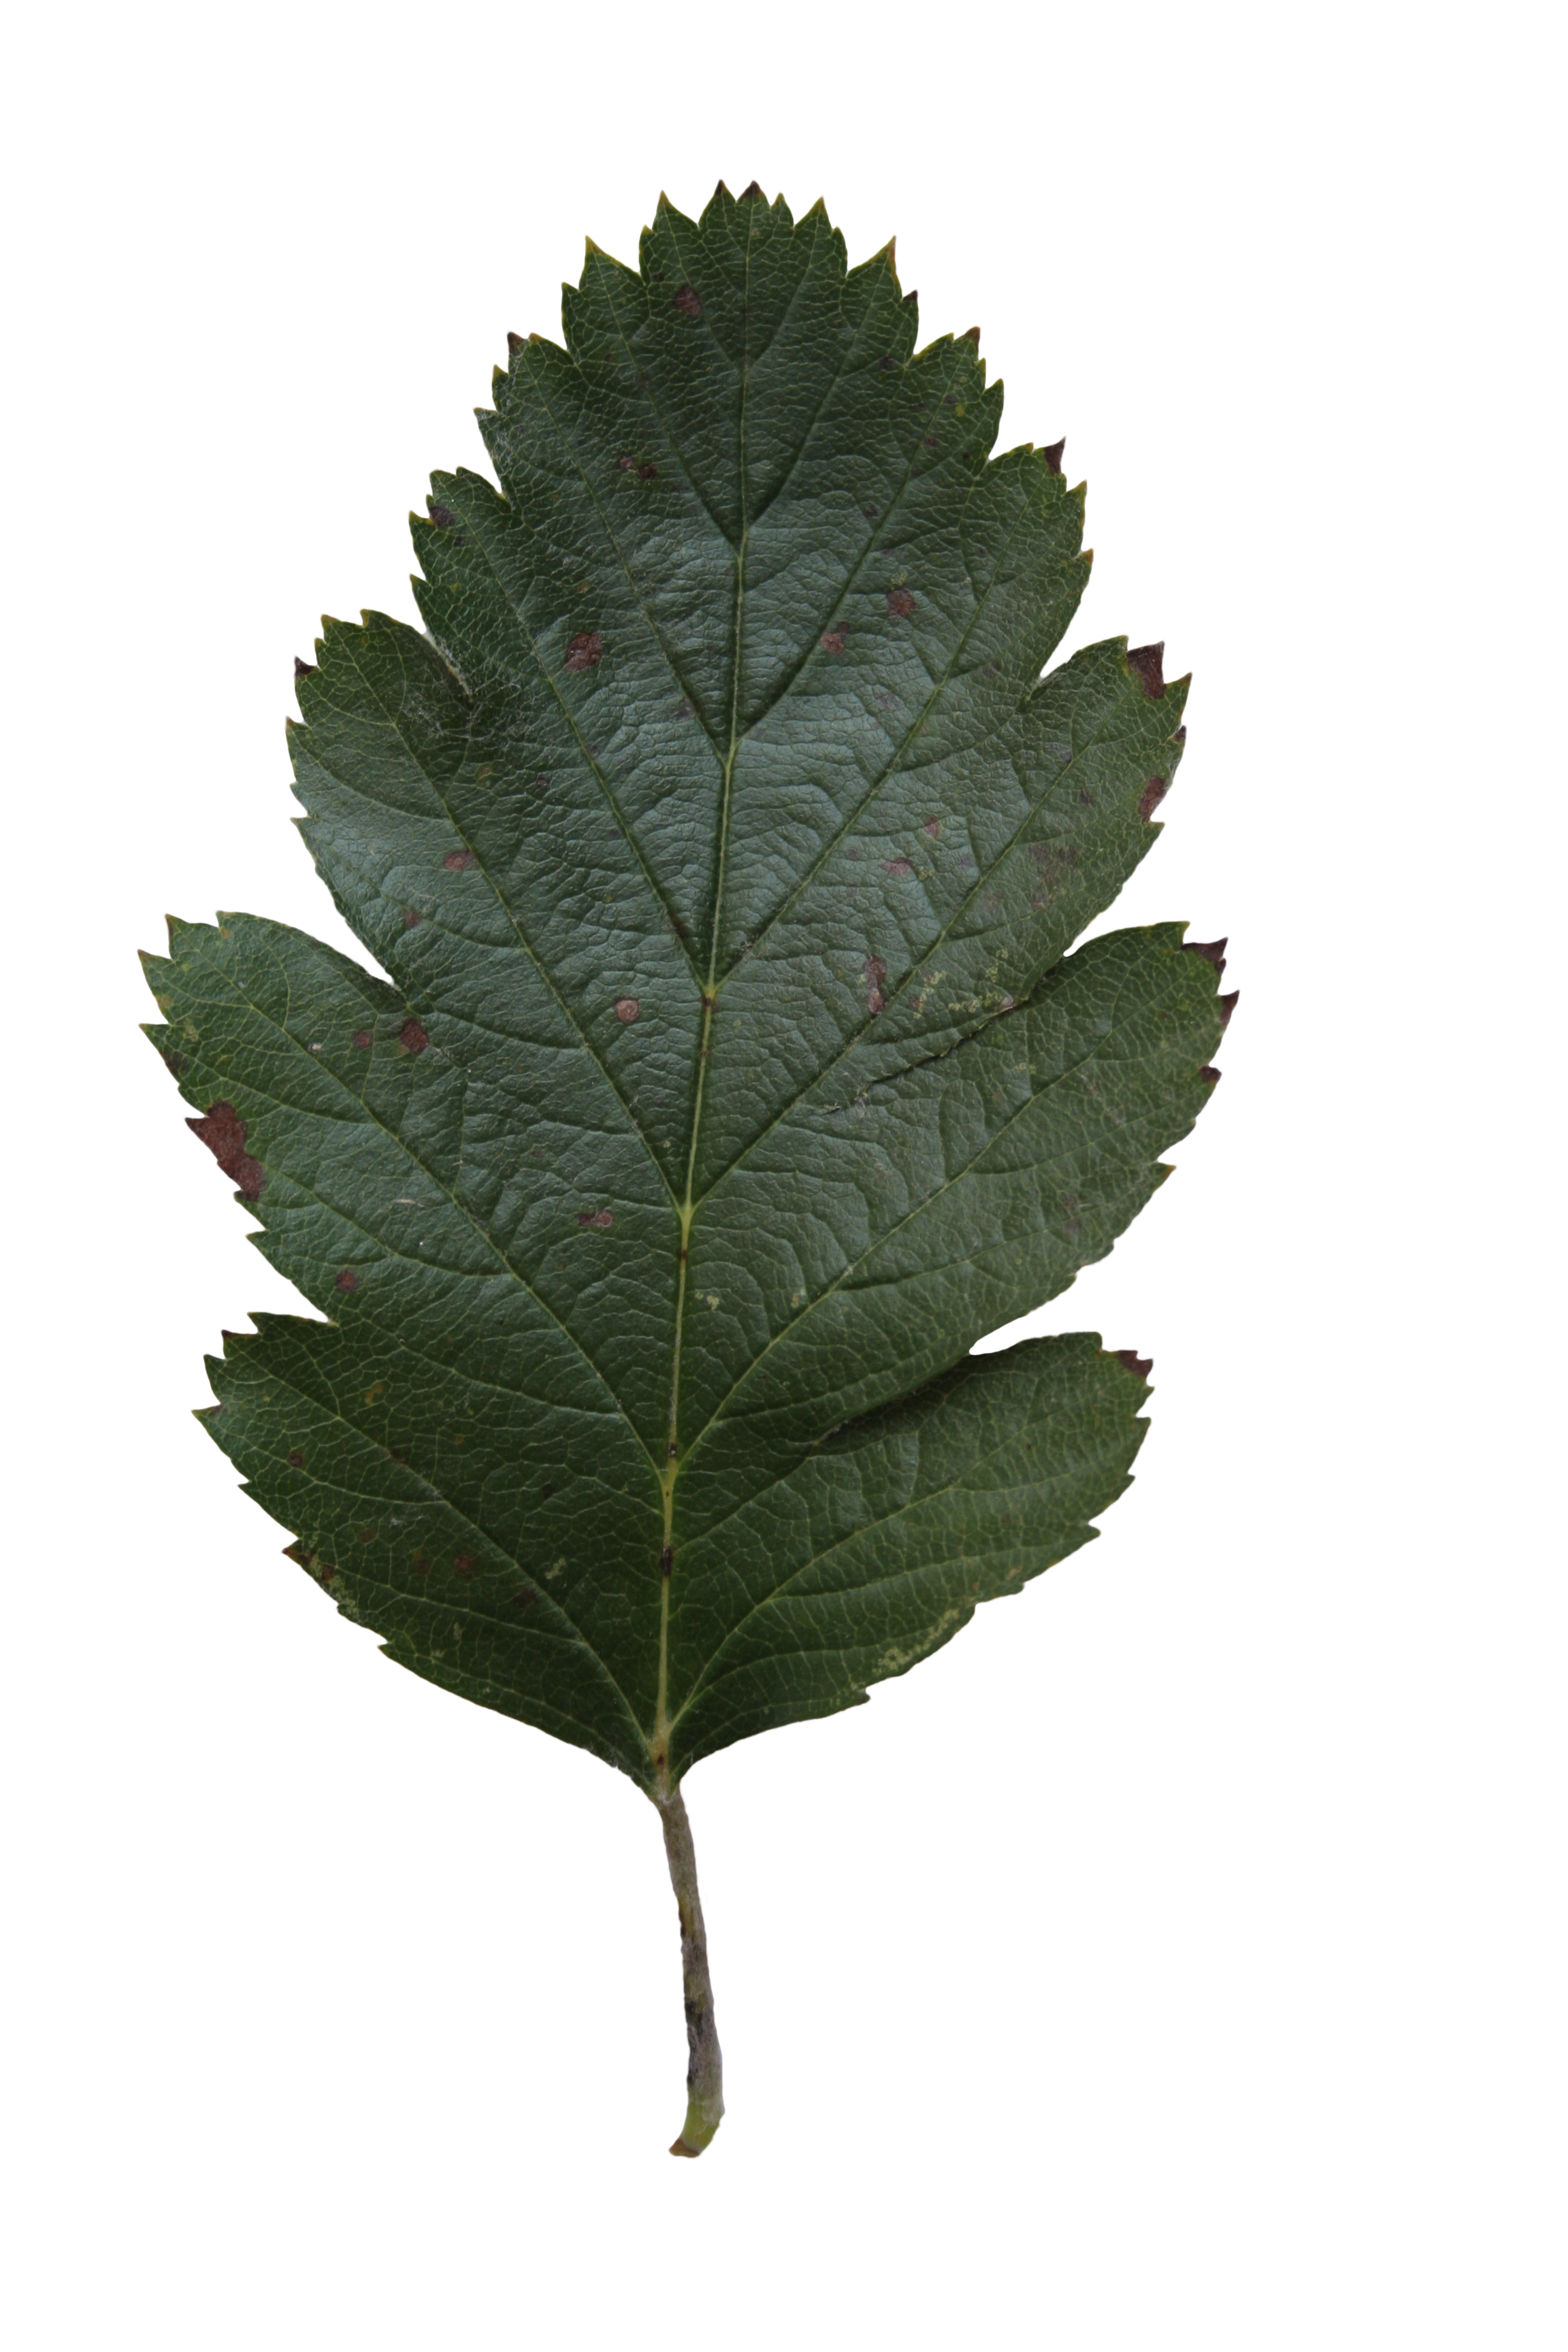 Oak leaf texture | Free Cut Out people, trees and leaves